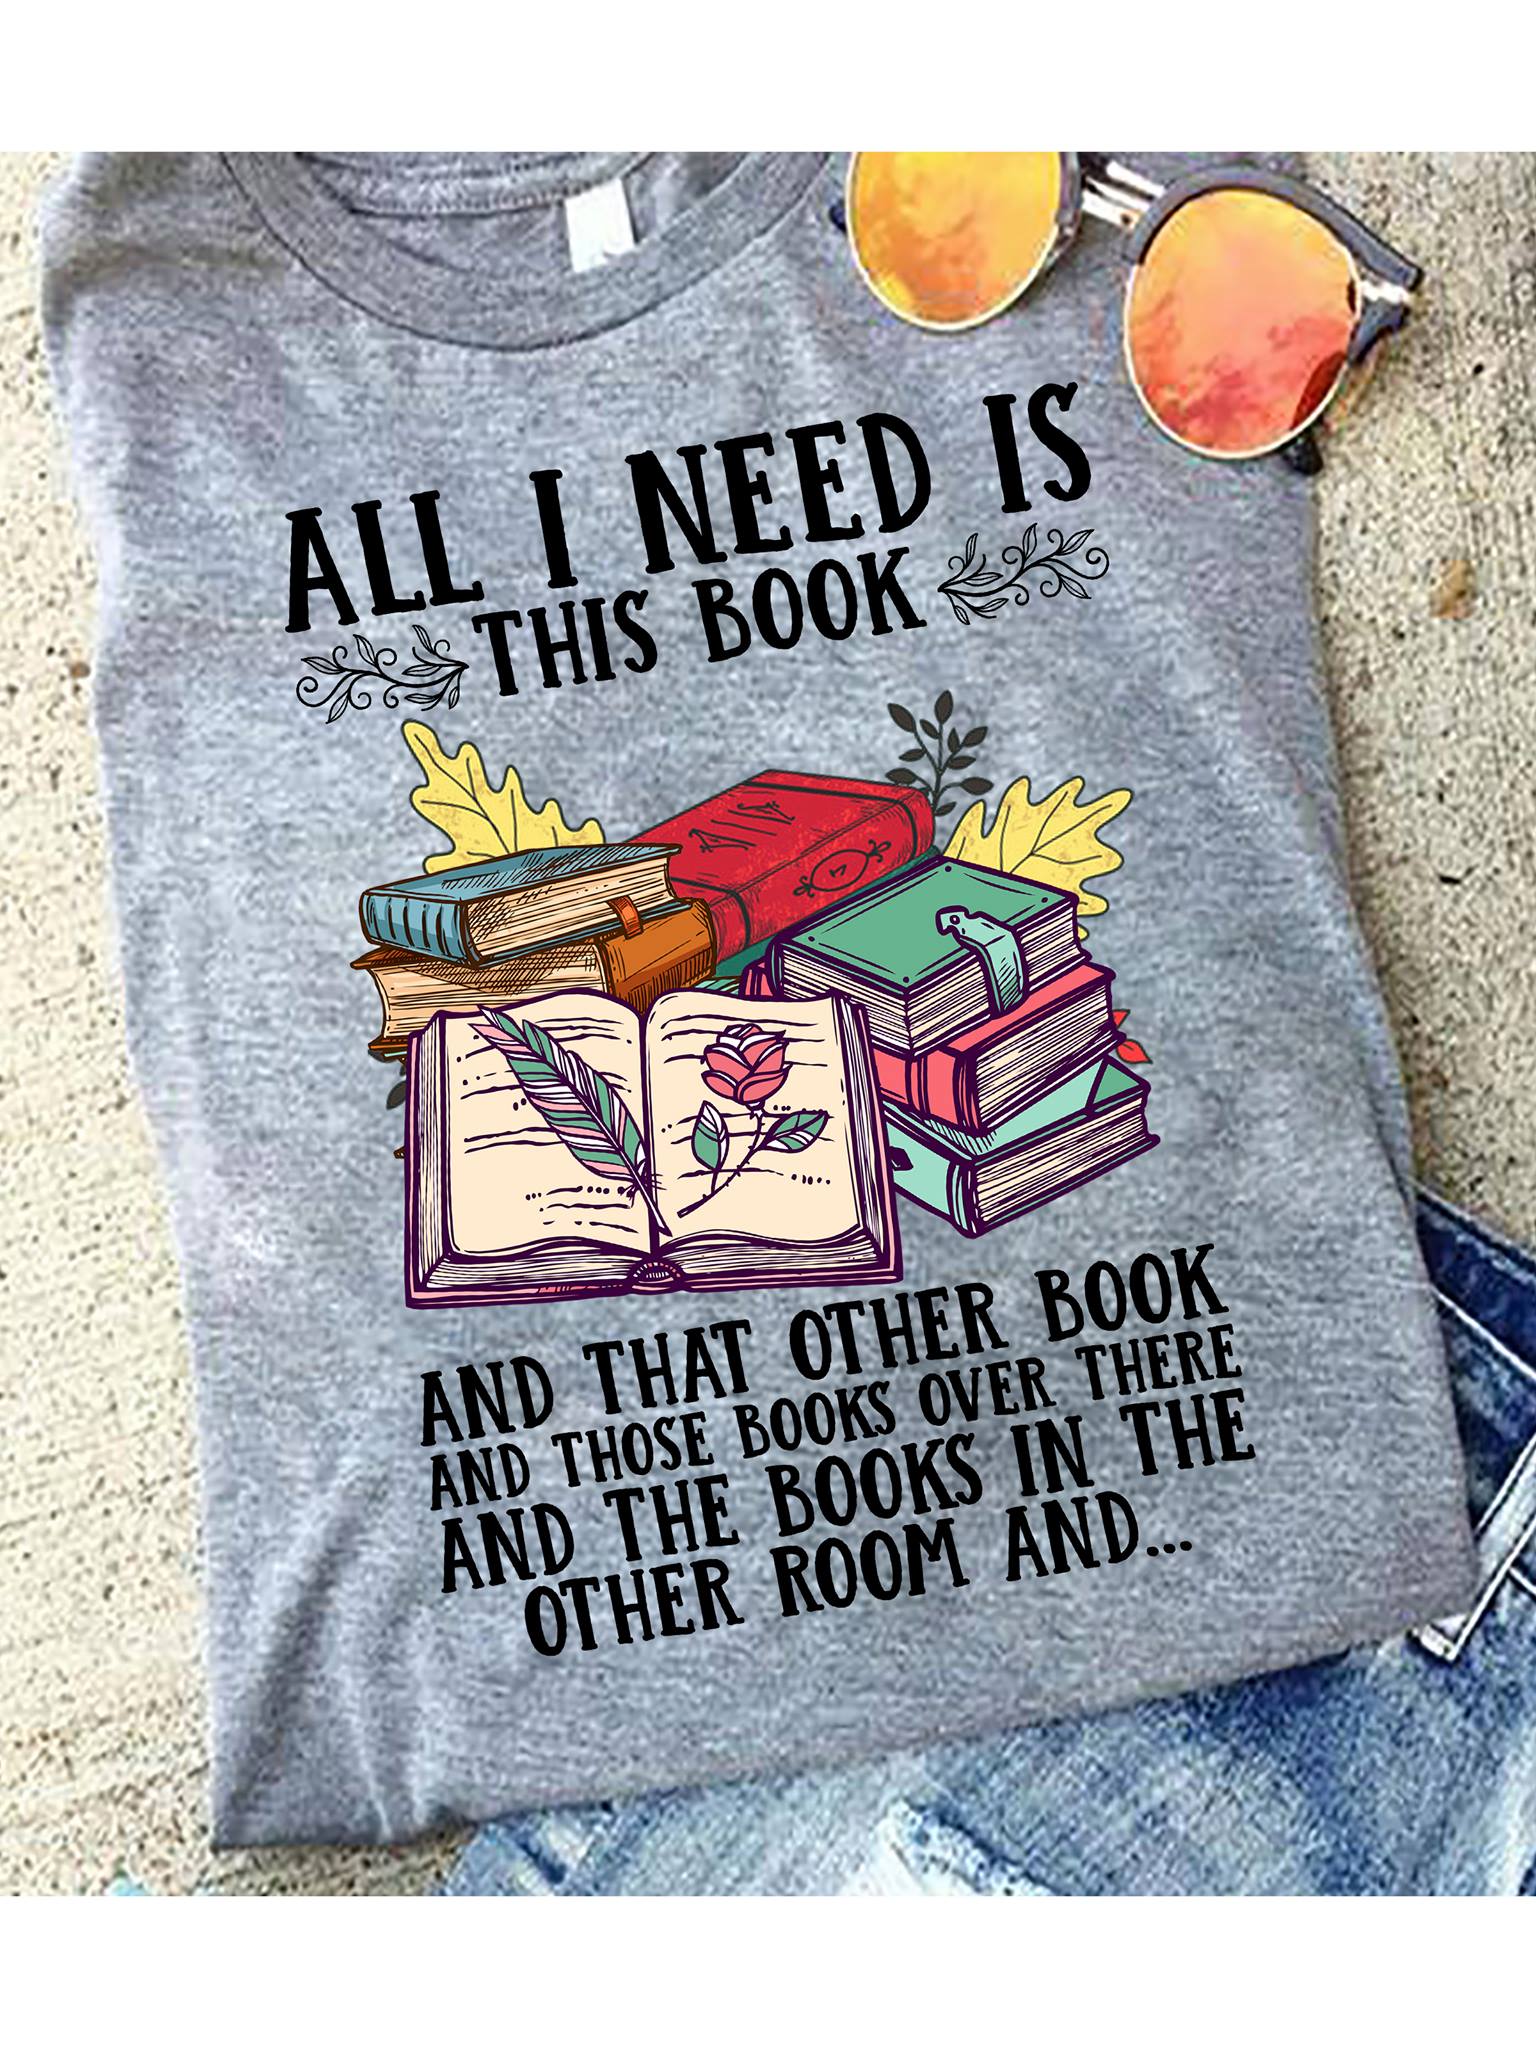 All I need is this book and that other book and those books over there